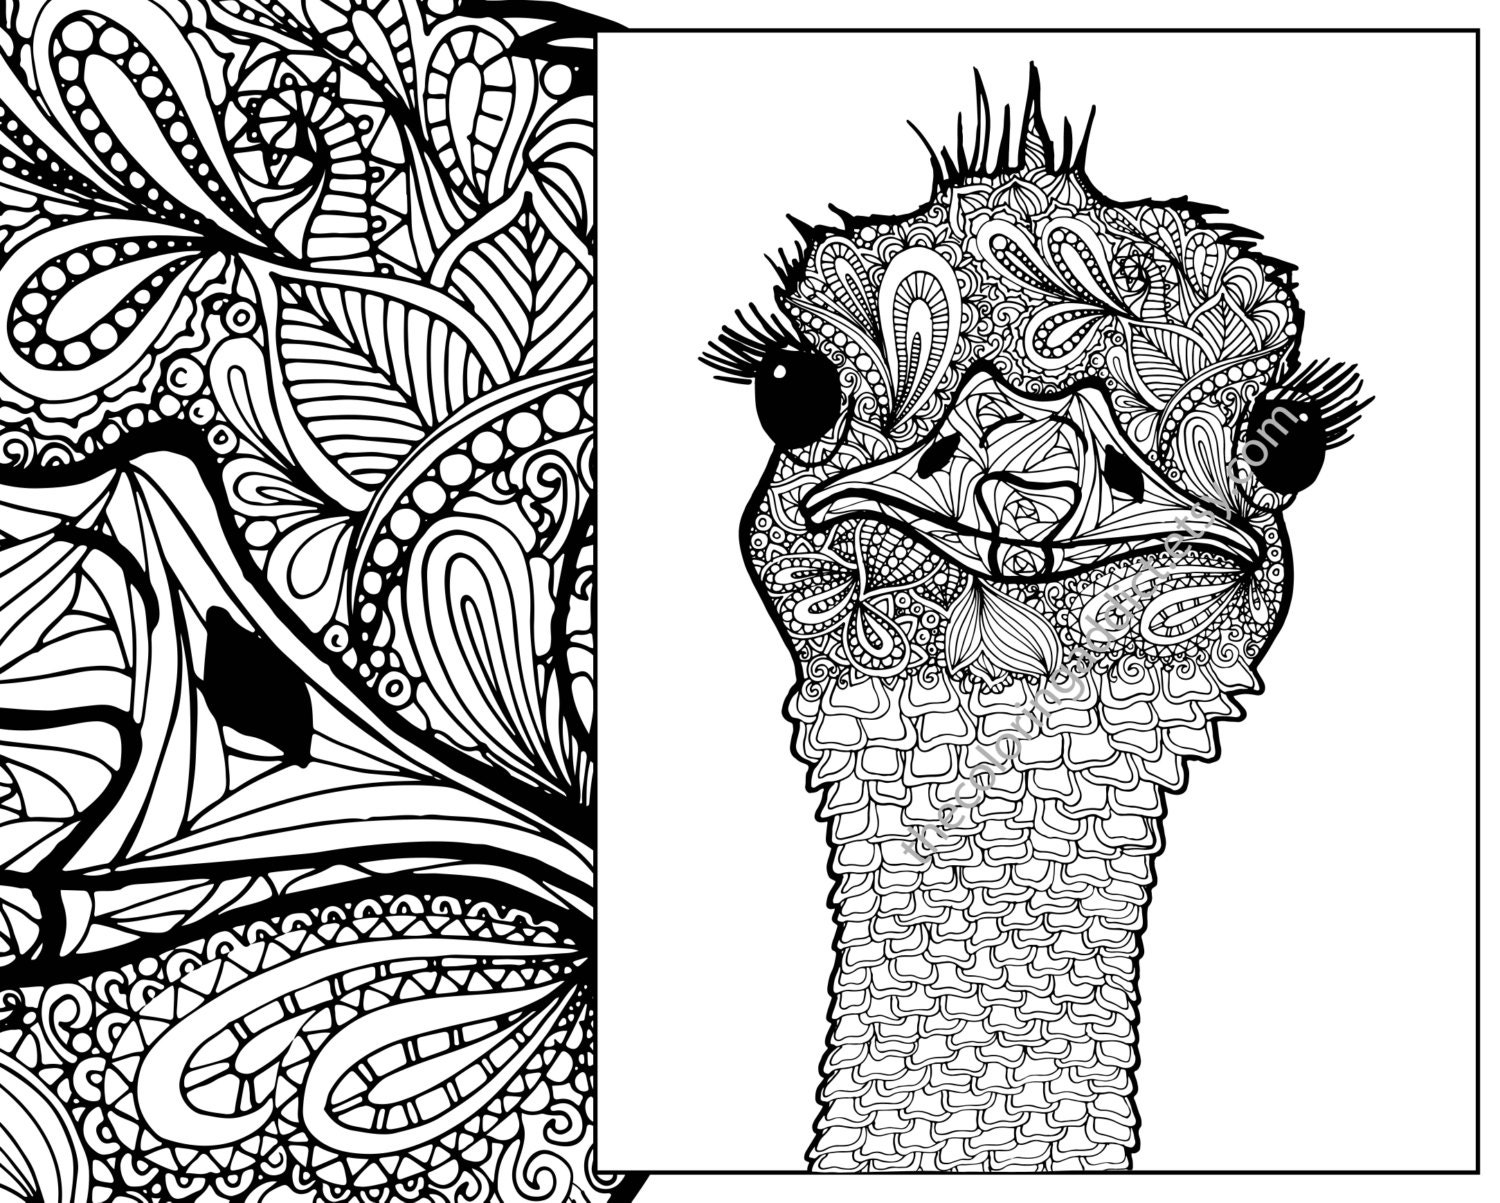 Download ostrich coloring sheet animal coloring pdf zentangle adult